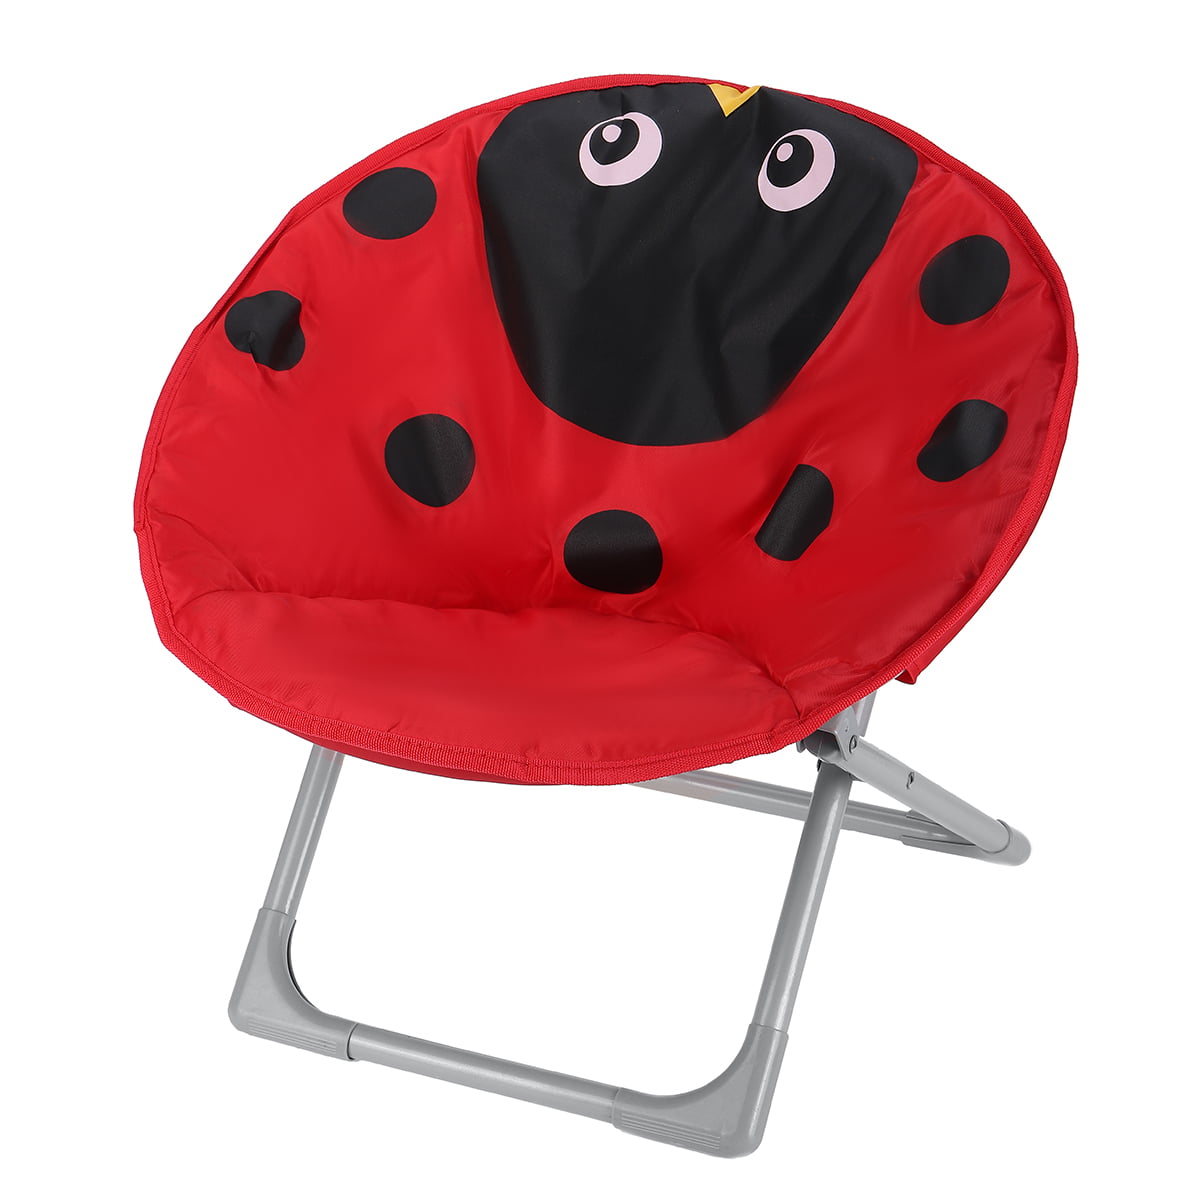 Kids Saucer Chair with Metal Frame, Kids Soft Wide